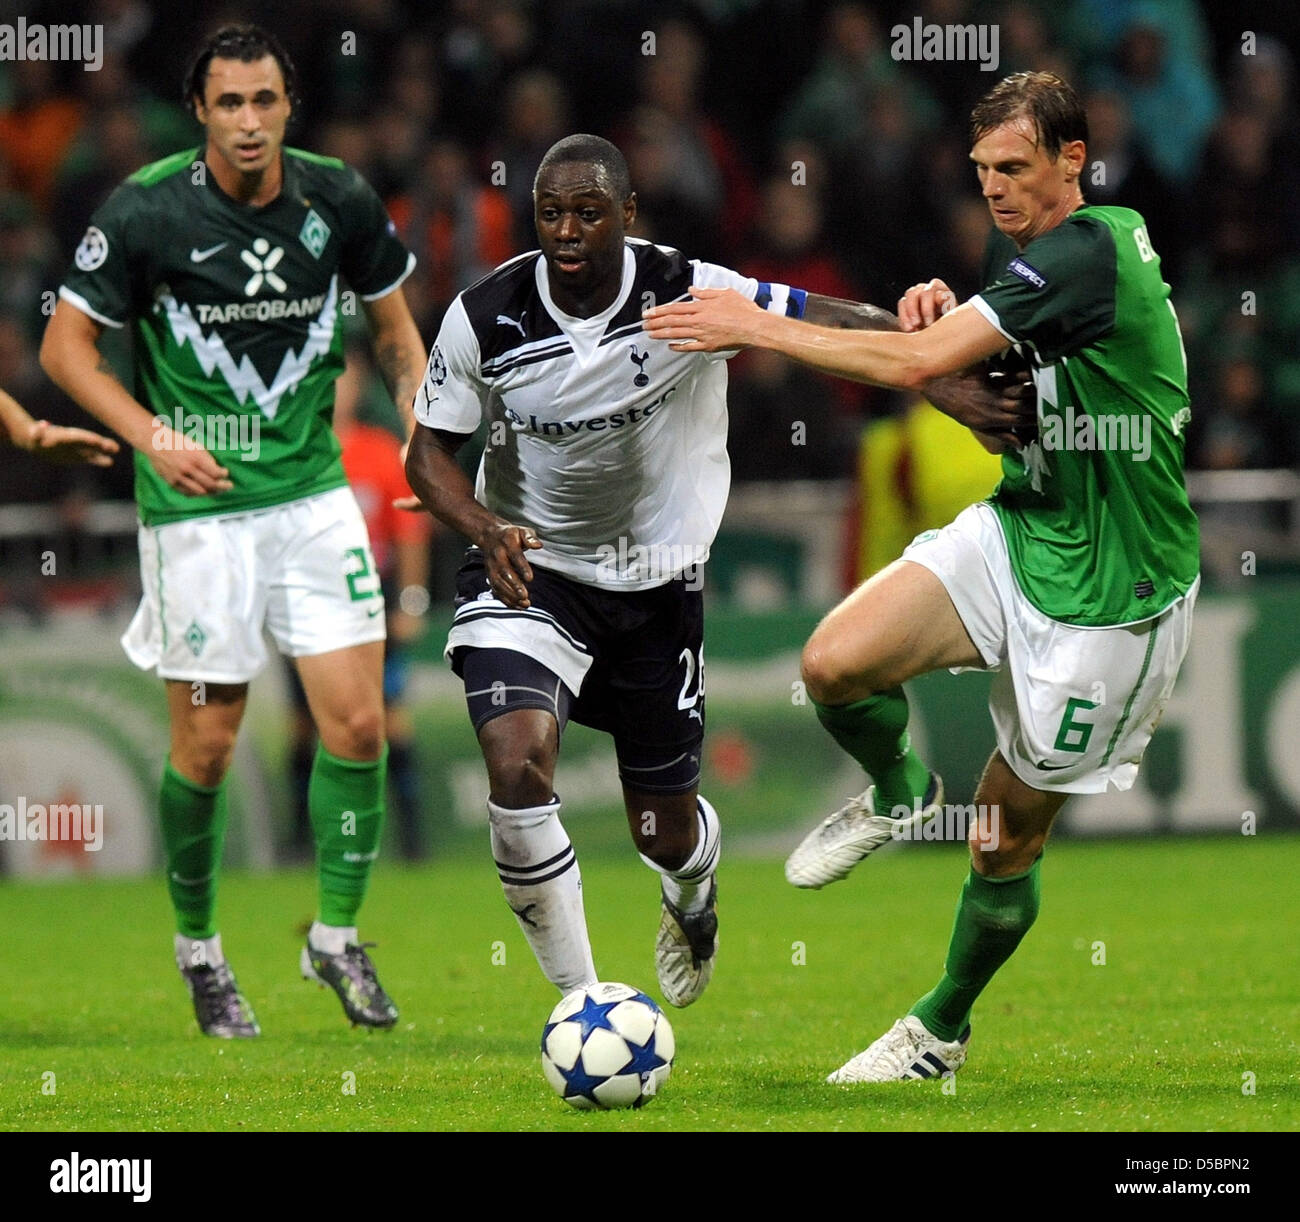 Werder Bremen faces Tottenham Hotspur in the Champions League Group A at the Weser Stadiun in Bremen, Germany, 14 September 2010. Hugo Almeida (L) and Tim Borowski (R) of Bremen vie for the ball with Tottenham's Ledley King. Photo: Ingo Wagner Stock Photo